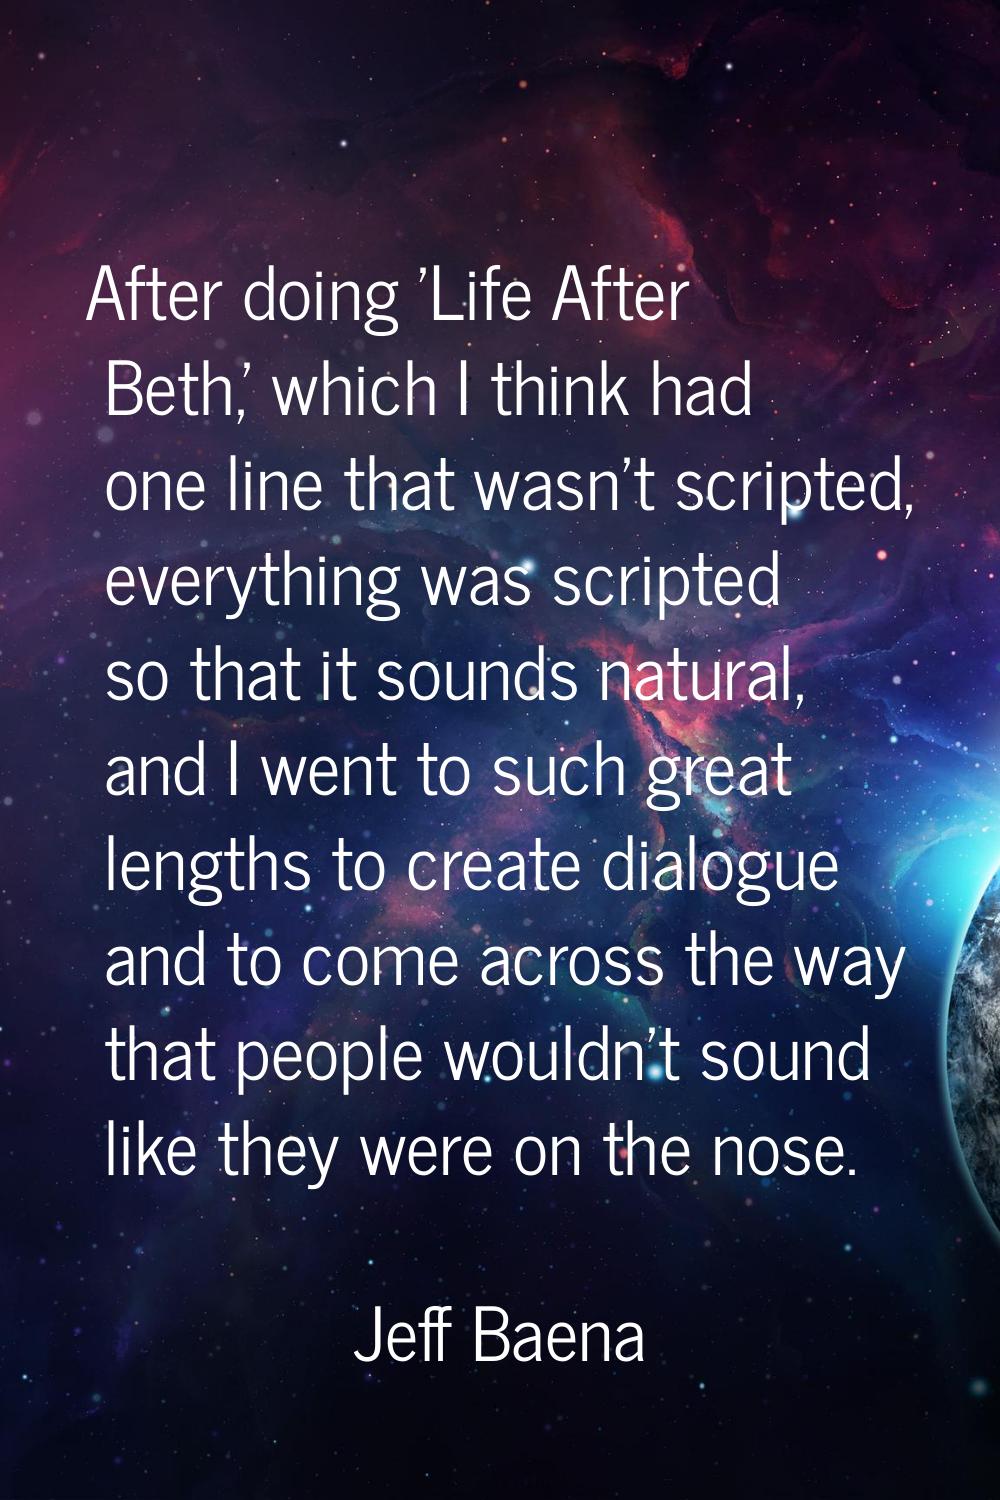 After doing 'Life After Beth,' which I think had one line that wasn't scripted, everything was scri